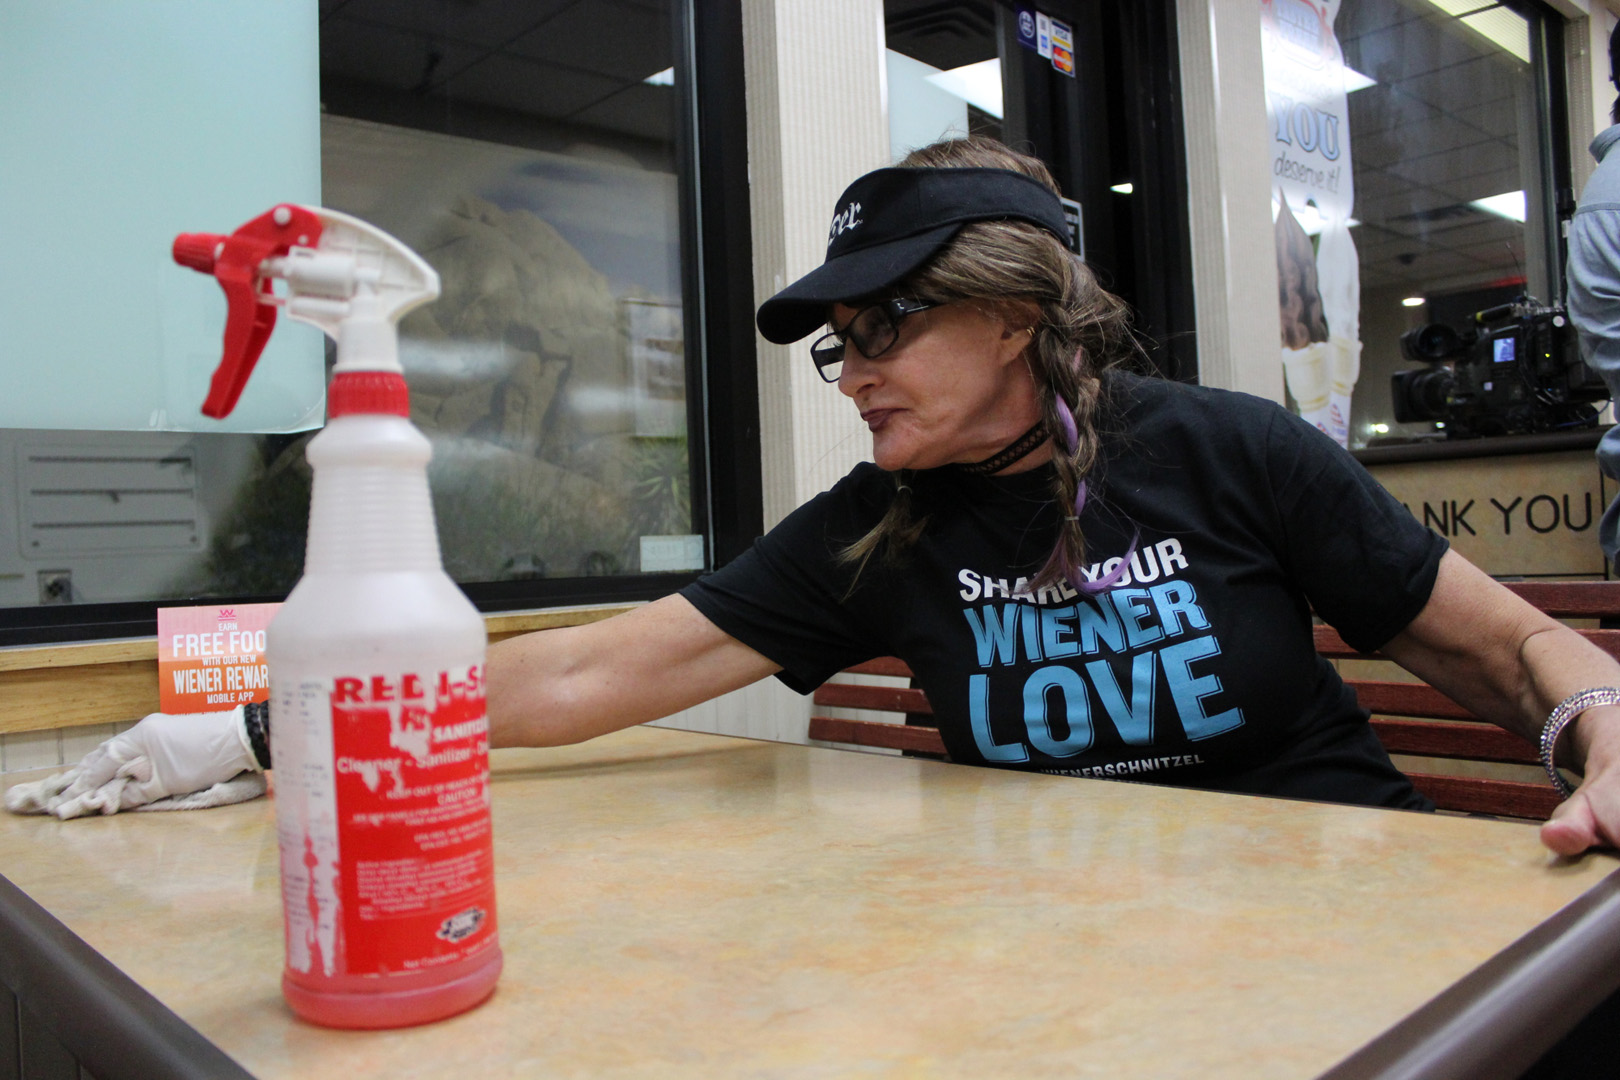 Cynthia wipes down a table while undercover at a Wienerschnitzel location.